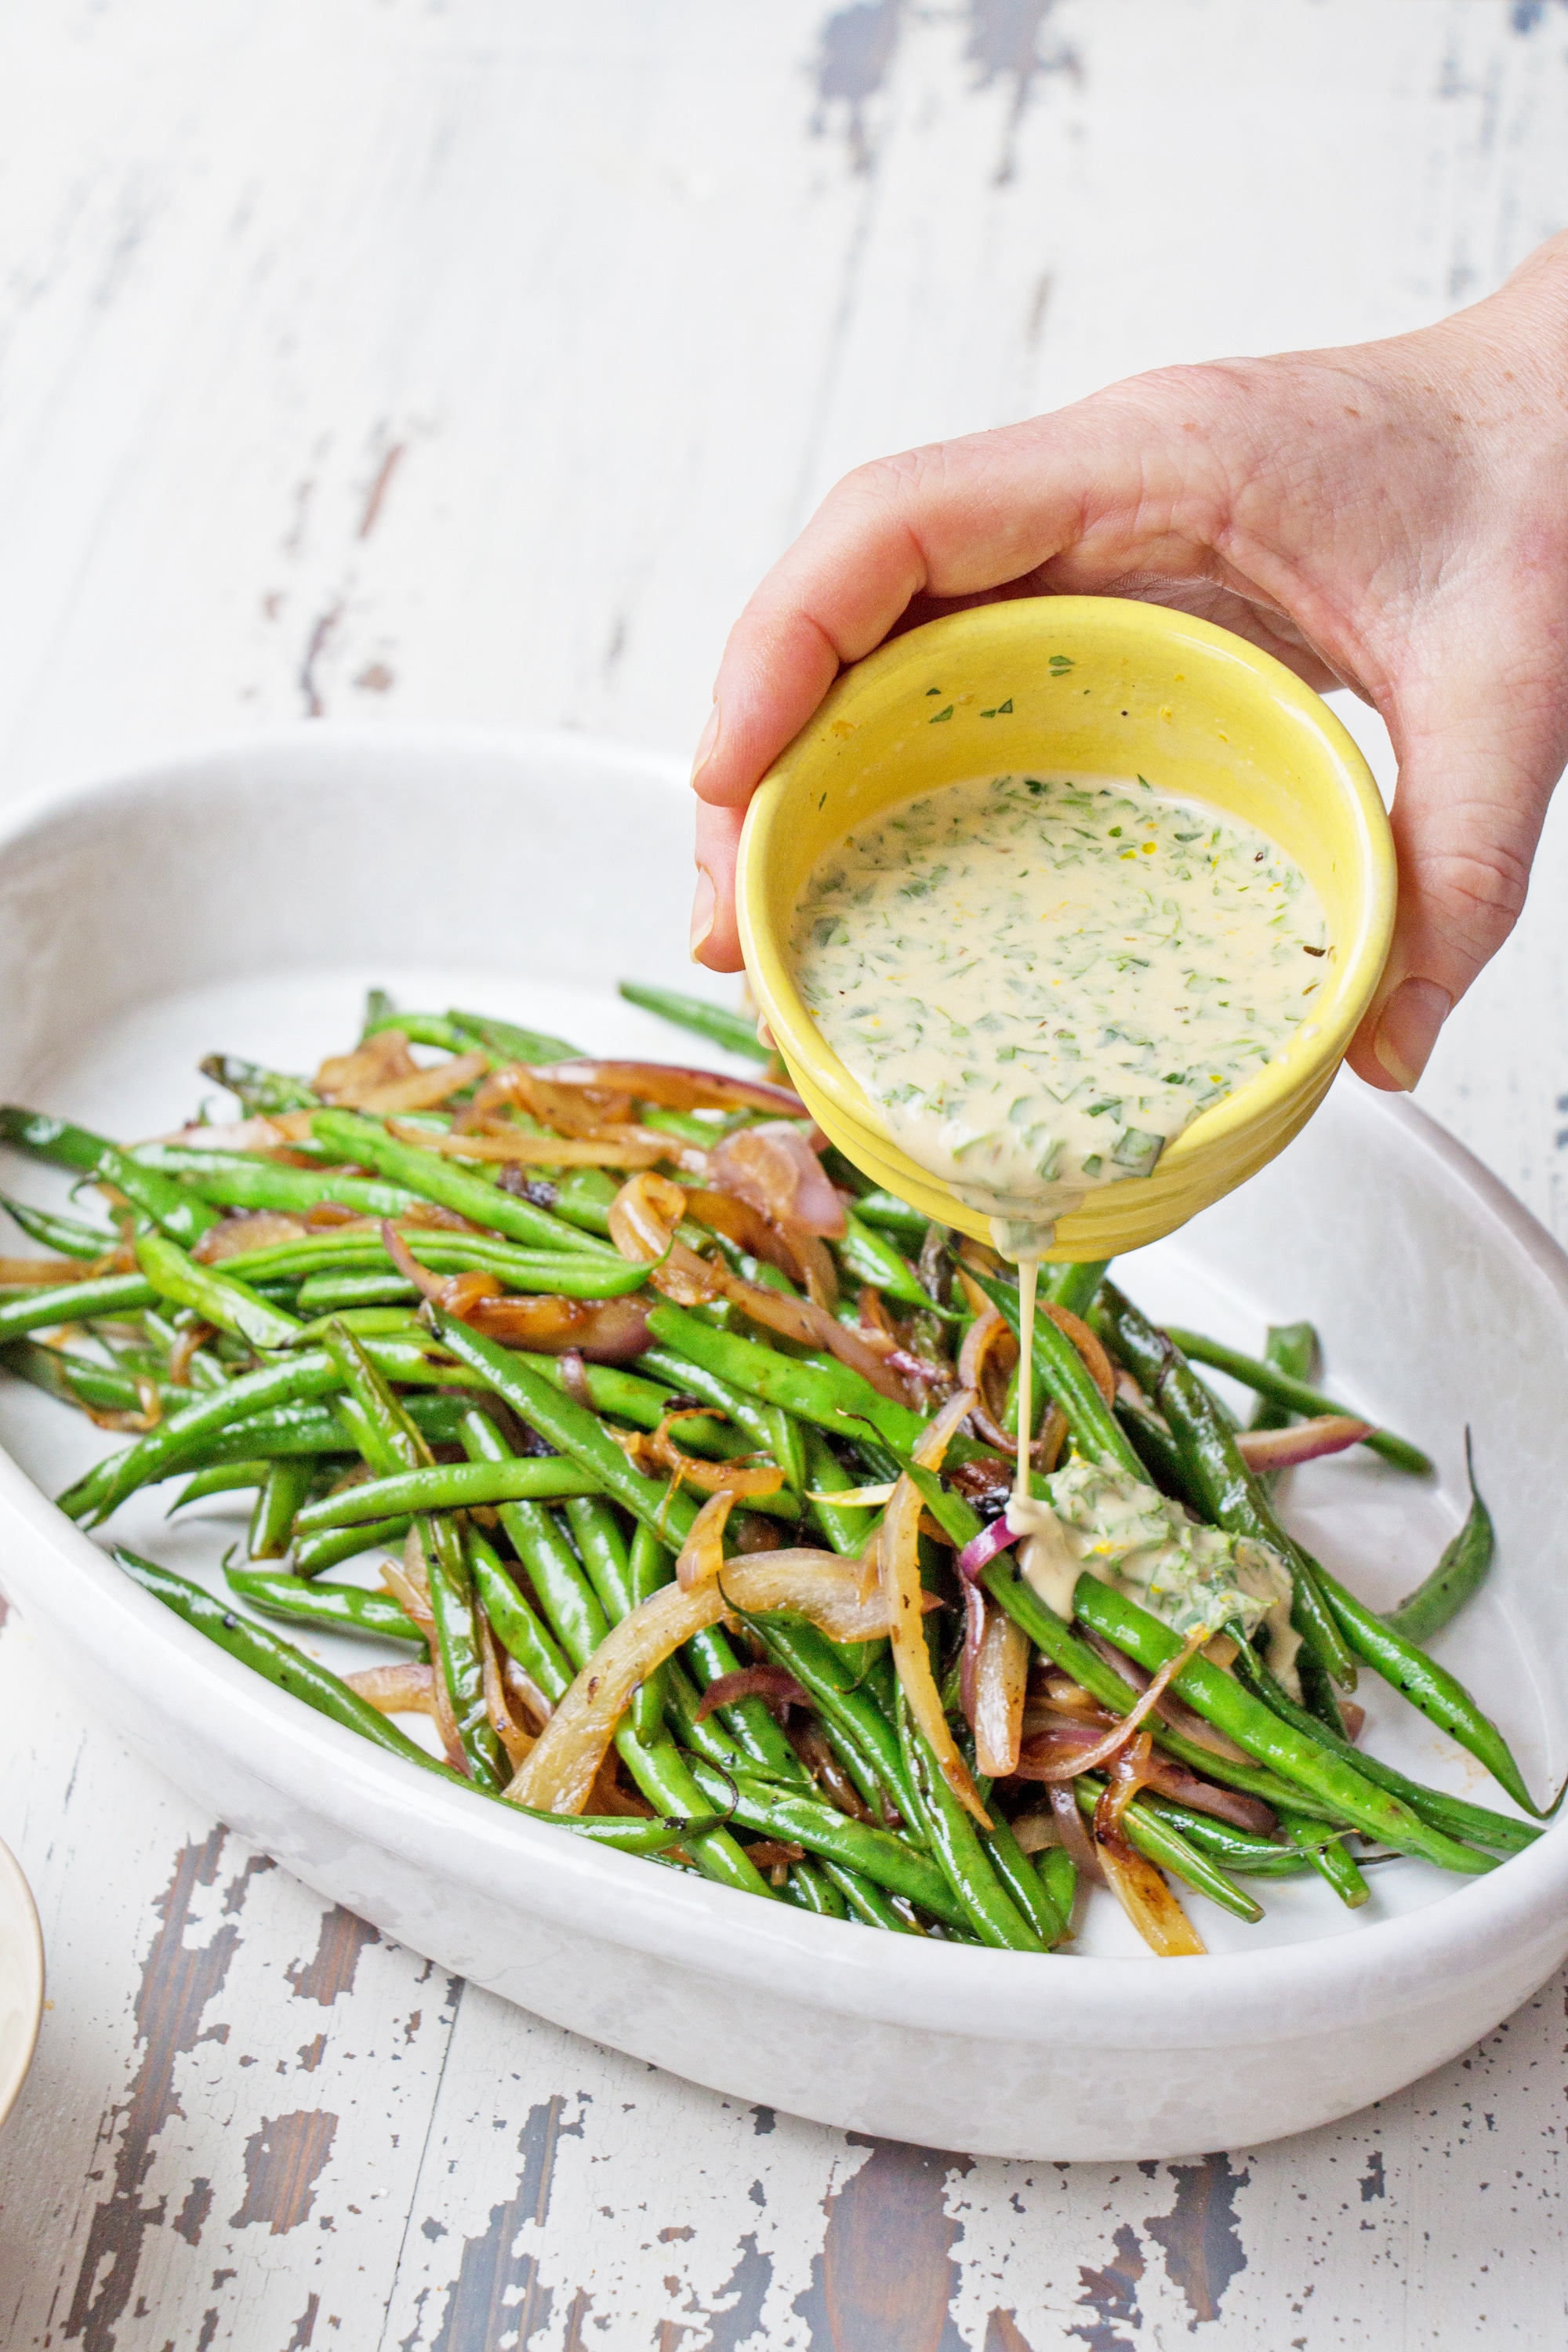 Pouring dressing over haricots verts and red onions.